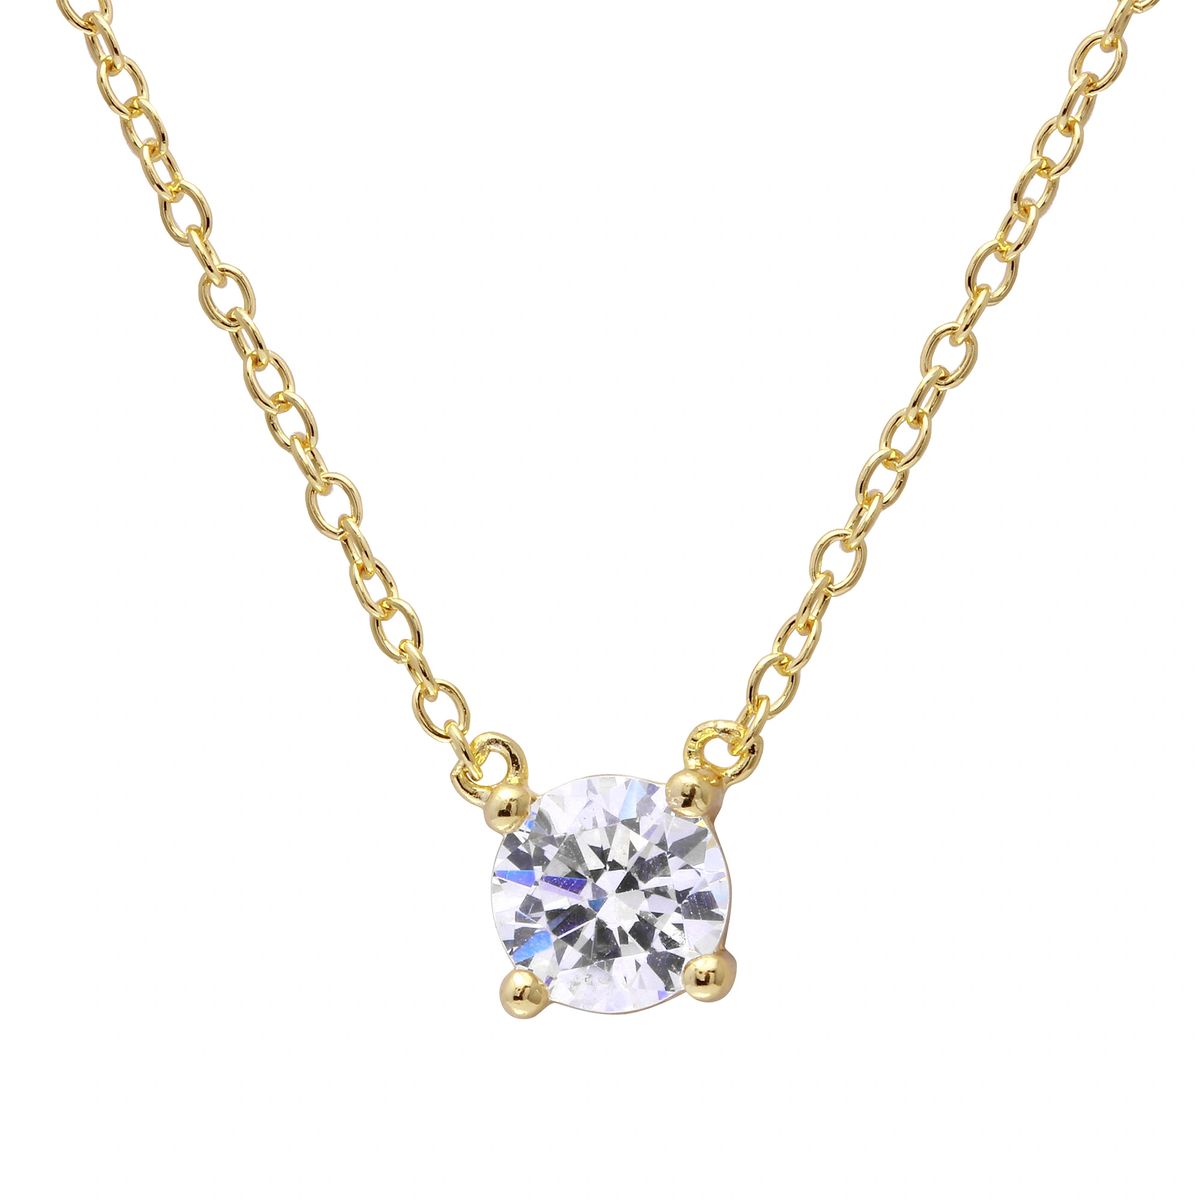 Solitary Square CZ Necklace